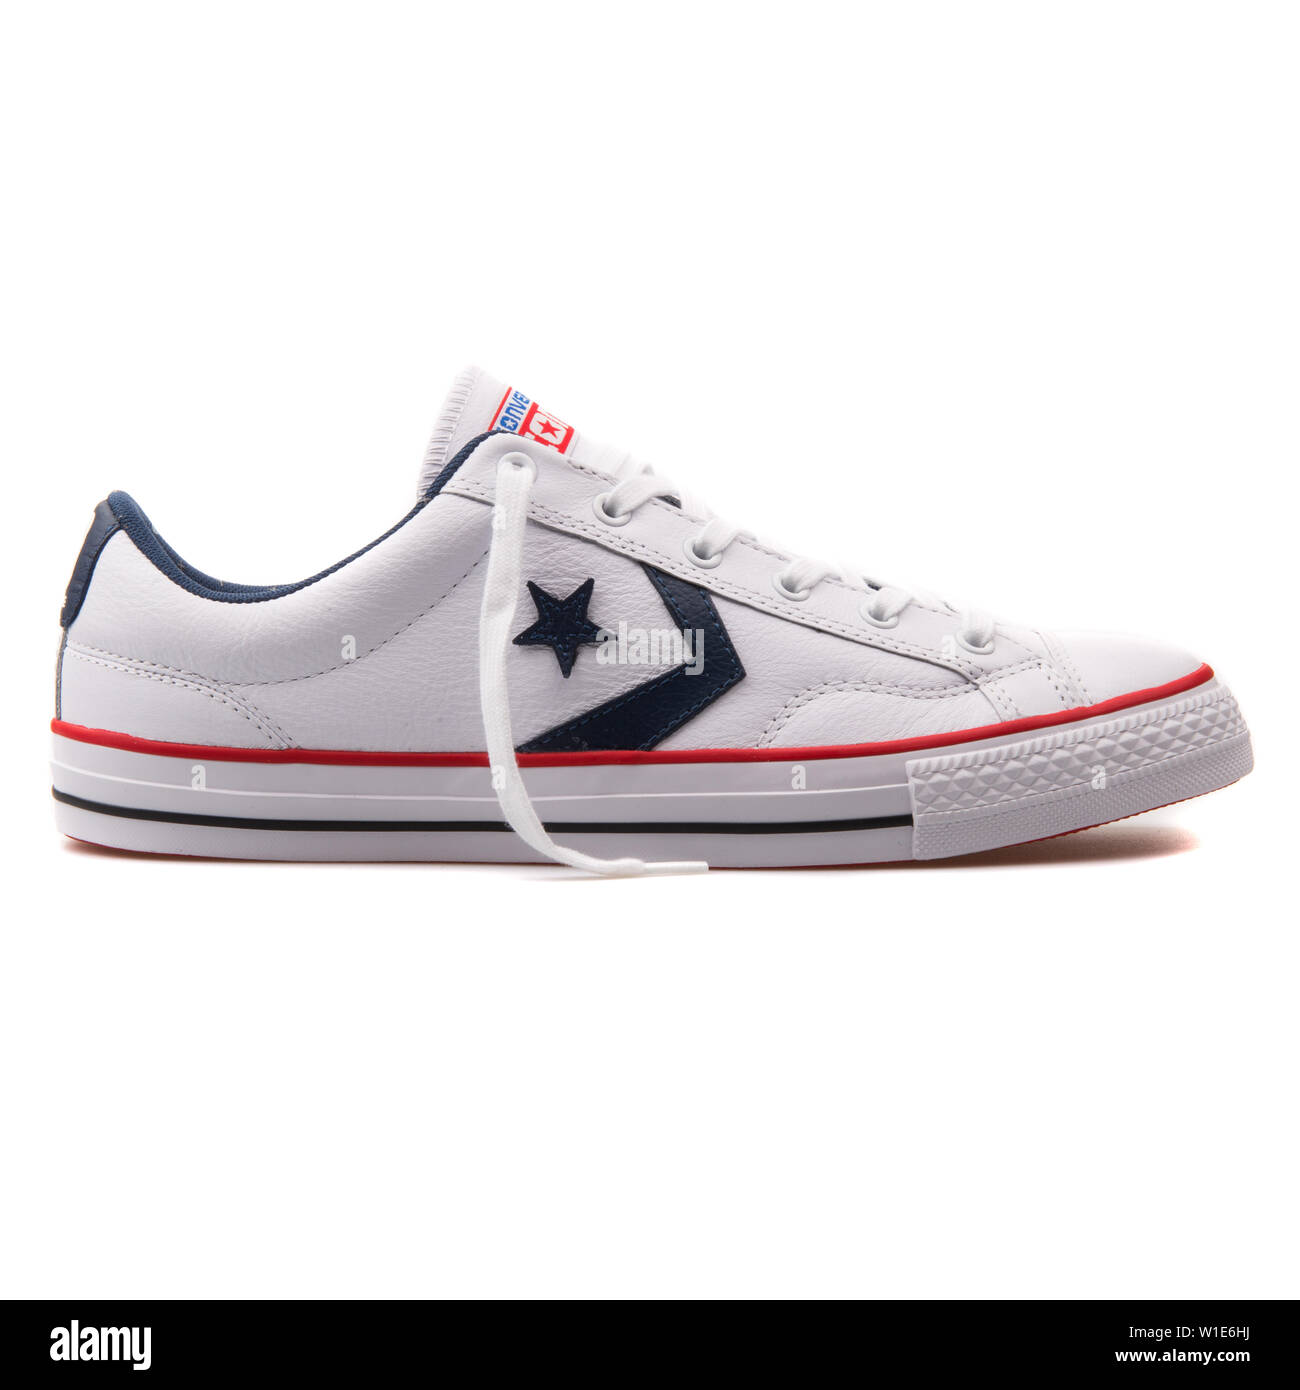 VIENNA, AUSTRIA - AUGUST 25, 2017: Converse Star Player OX white and navy blue sneaker on background Stock Photo -